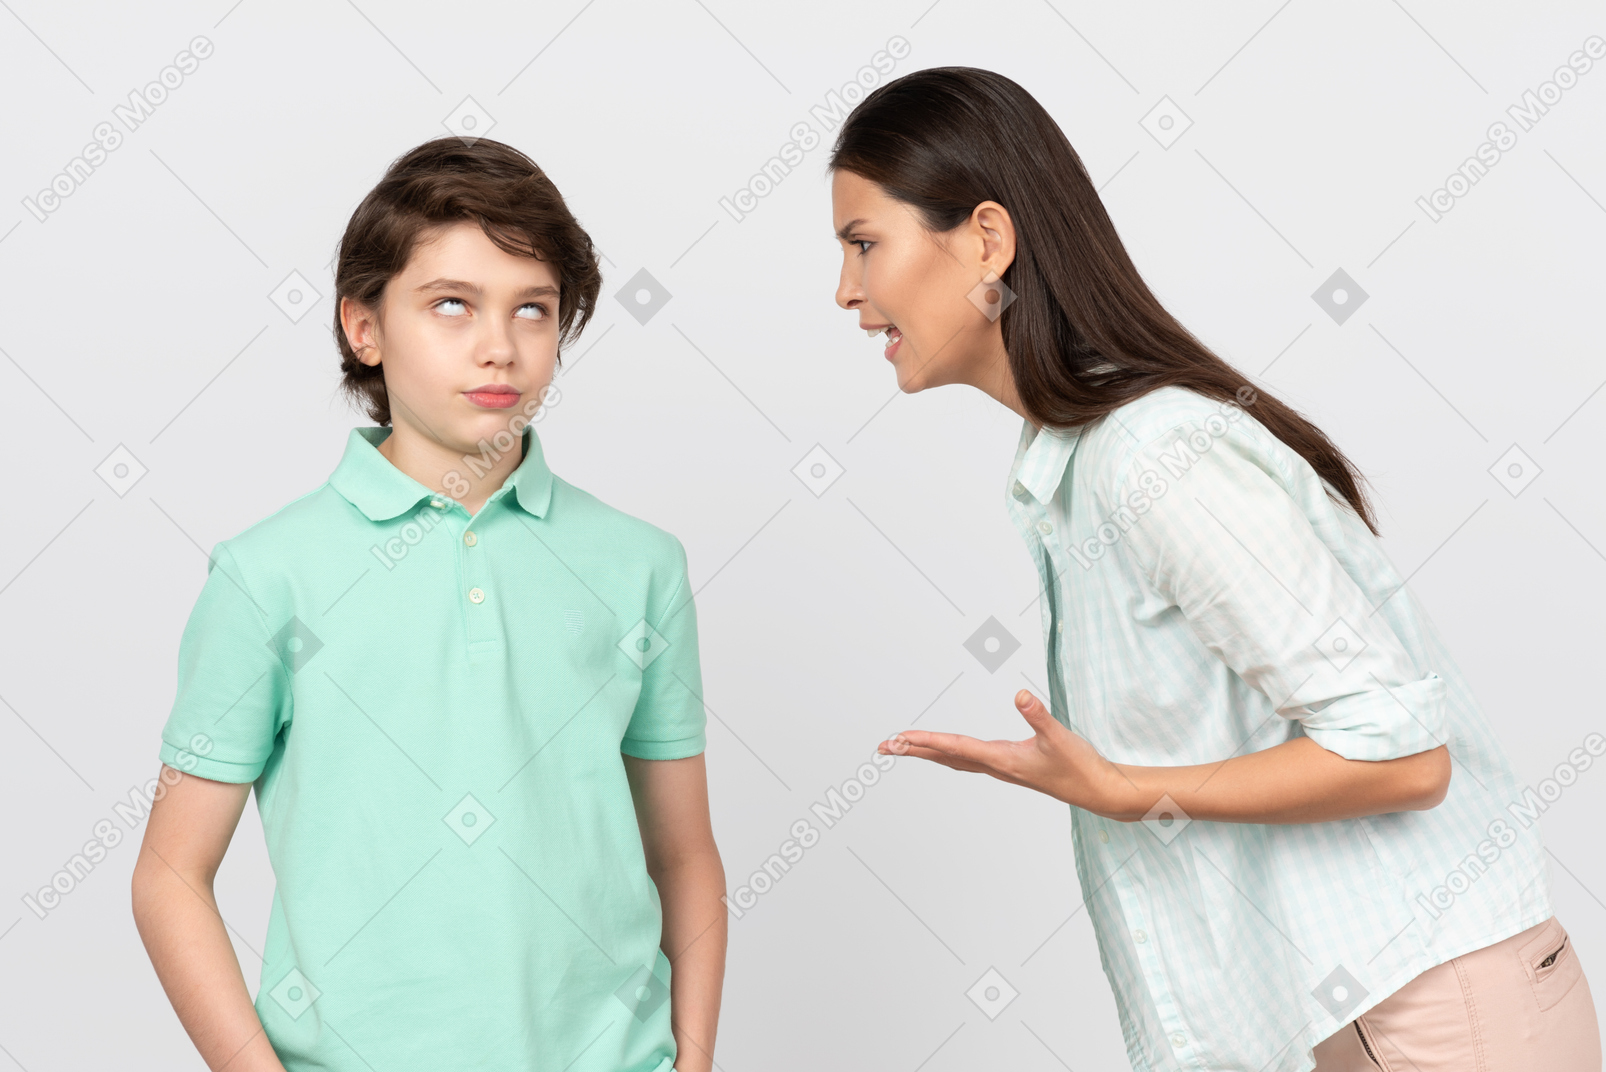 Angry mother telling her son off